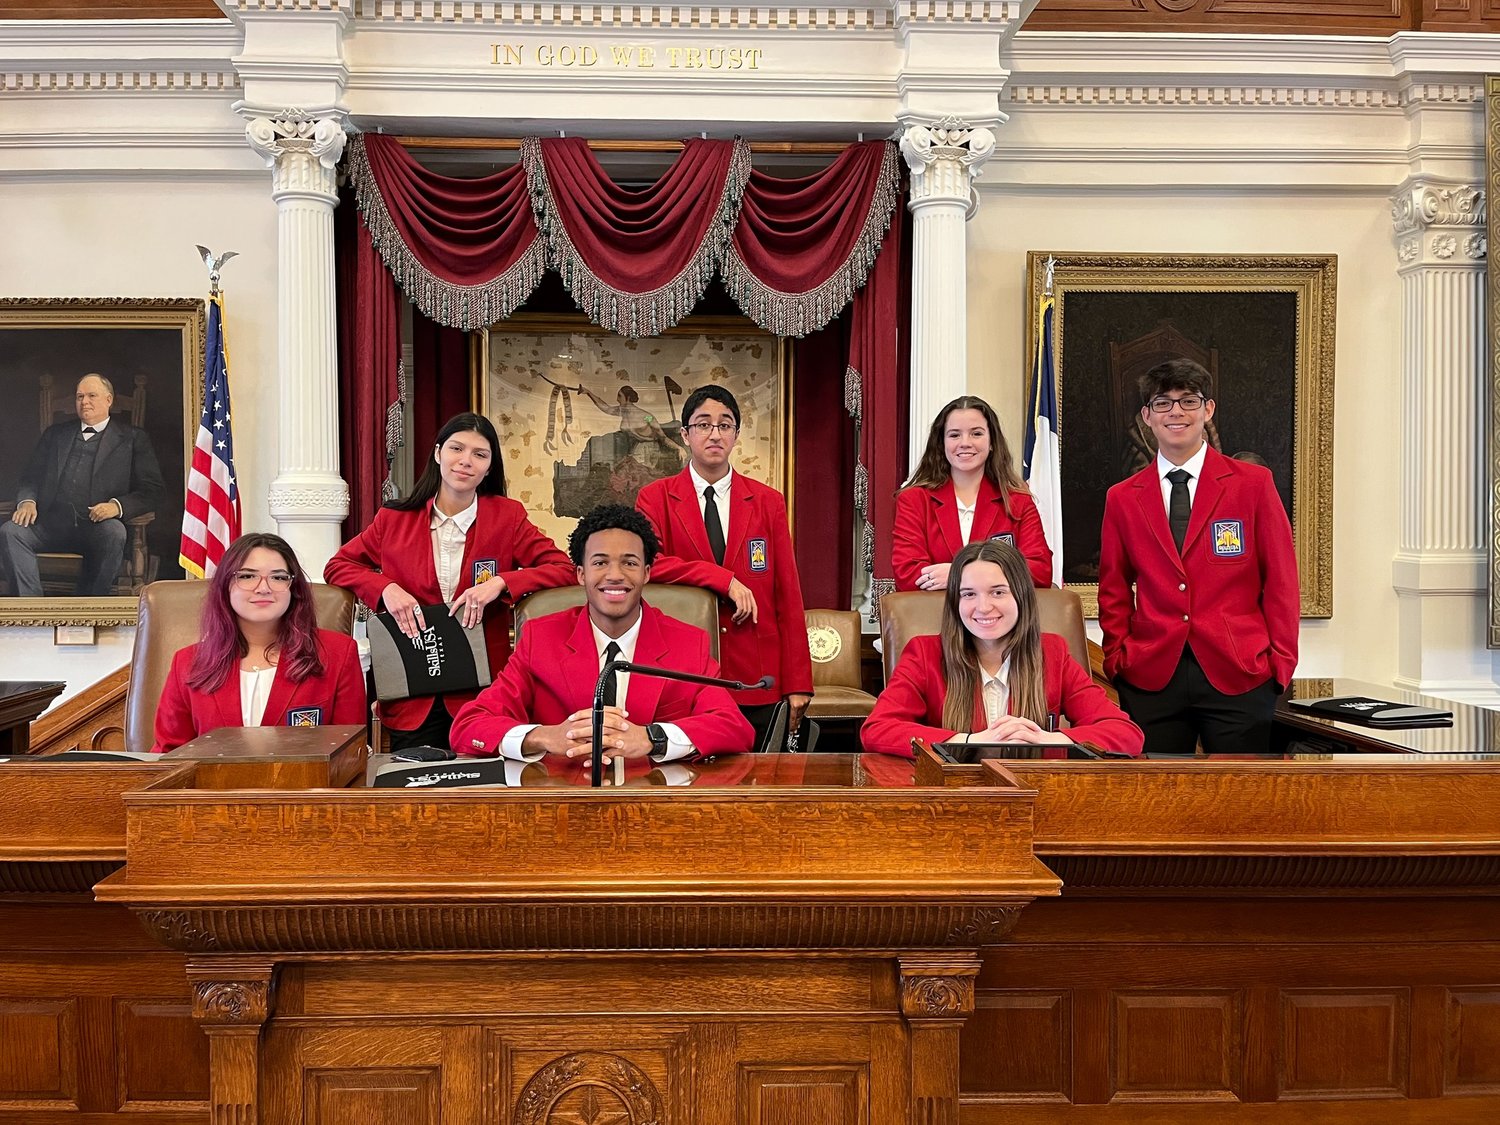 The students also visited the Texas House of Representatives, where they participated in mock debates using parliamentary procedures they learned. Here they are pictured at the speaker’s rostrum in the House chamber. Directly behind the students is the battle flag flown during the Battle of San Jacinto on April 21, 1836. The portrait on the left is of Gov. James Stephen Hogg, the first native-born governor of Texas. He served from 1891-95.